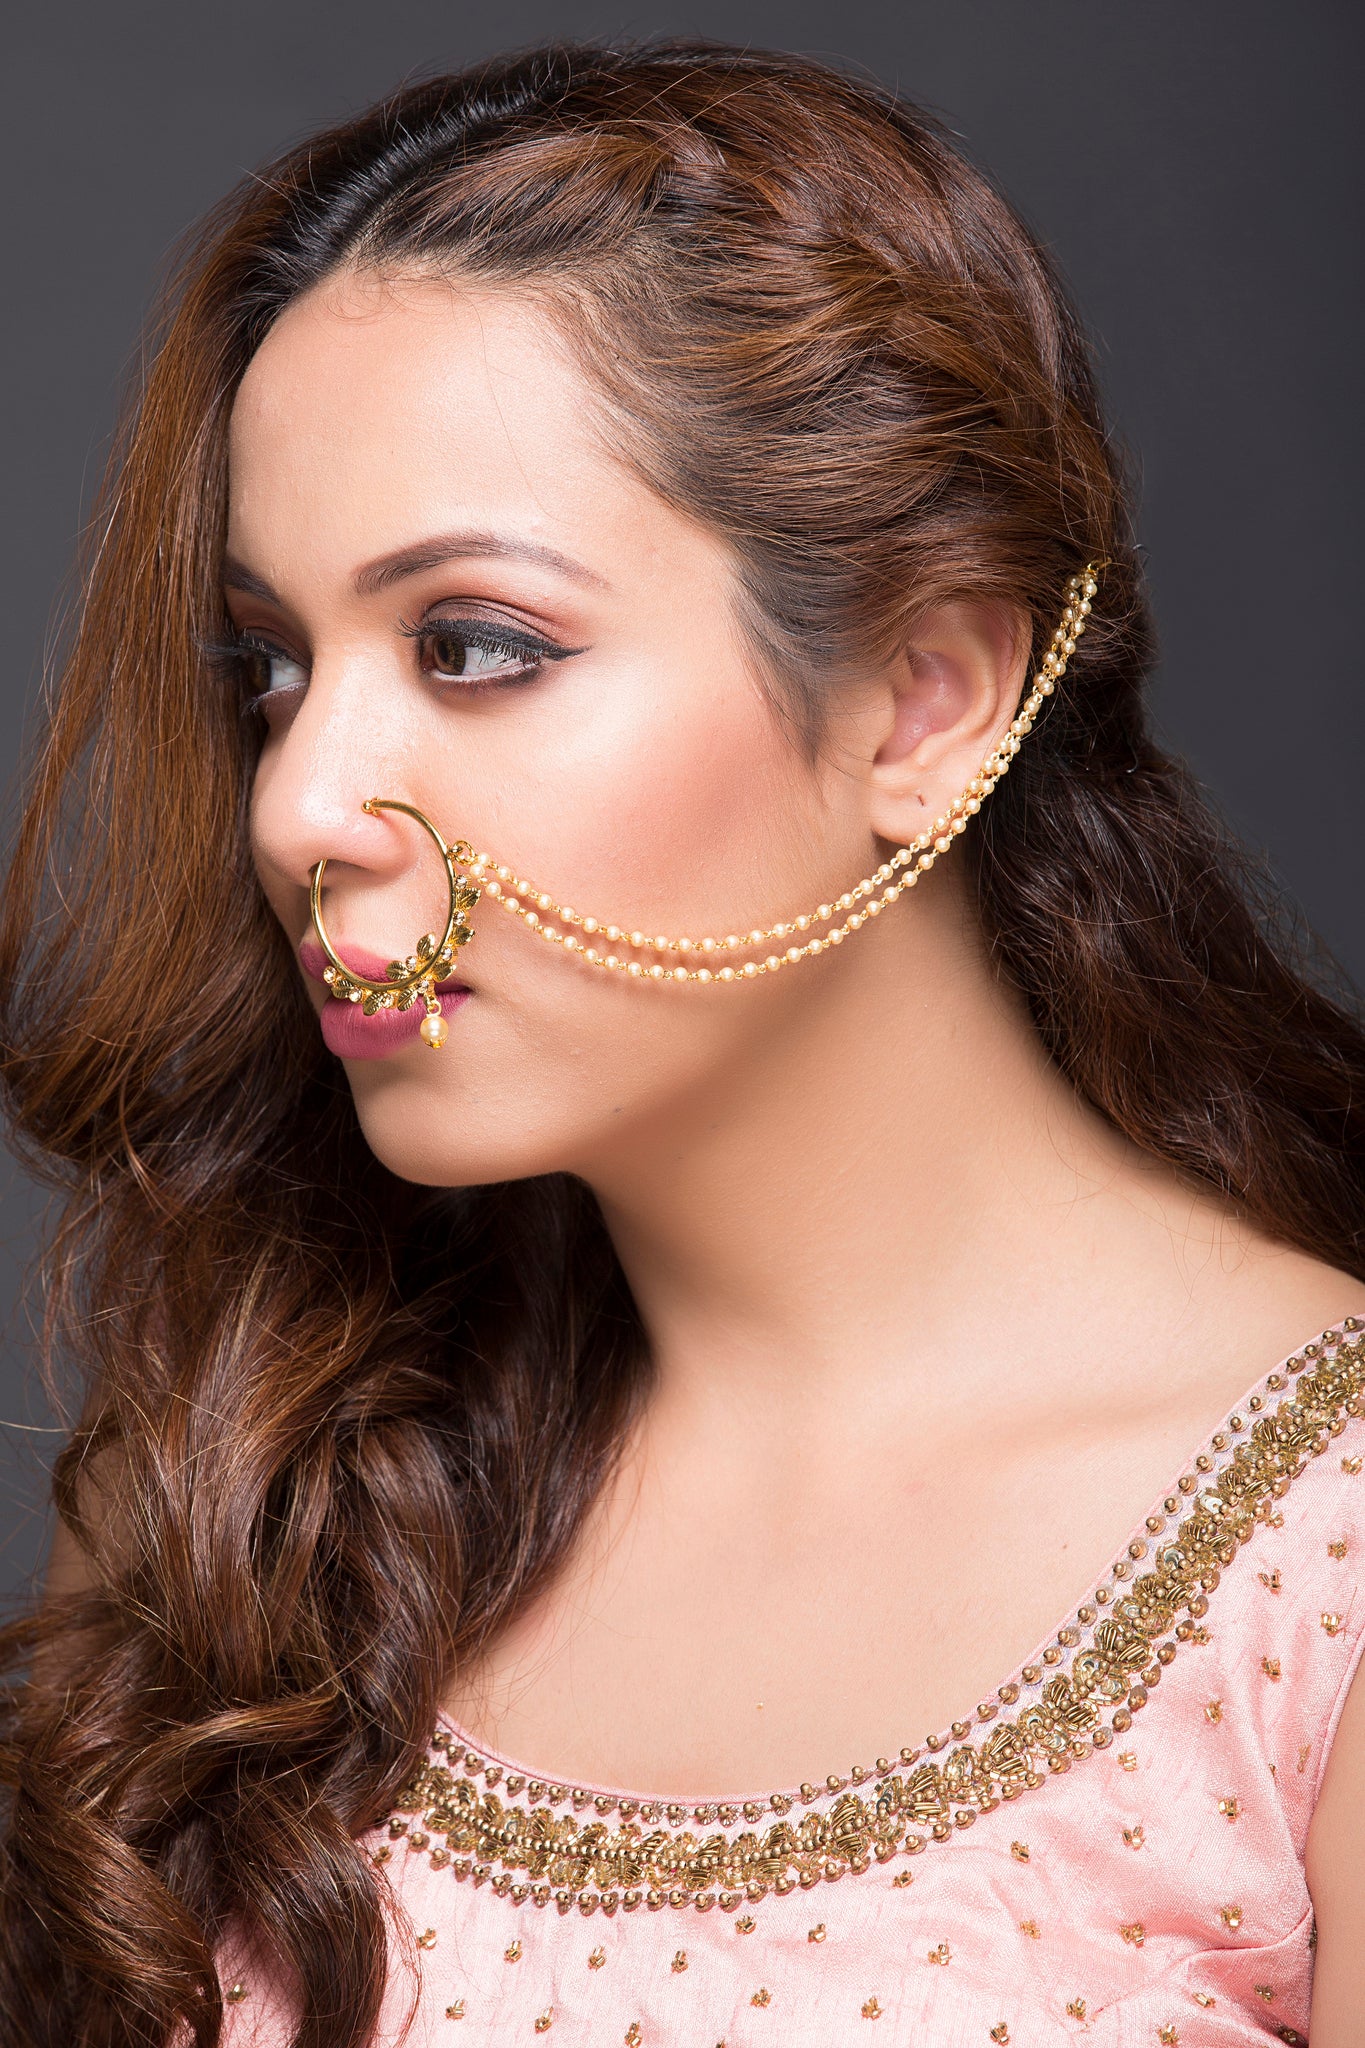 Buy ACCESSHER Golden Kundan Nose Pin with Chain Clip On Nose Ring Small  Nath Kundan (1.5cms) for women and girls pack of 1 at Amazon.in